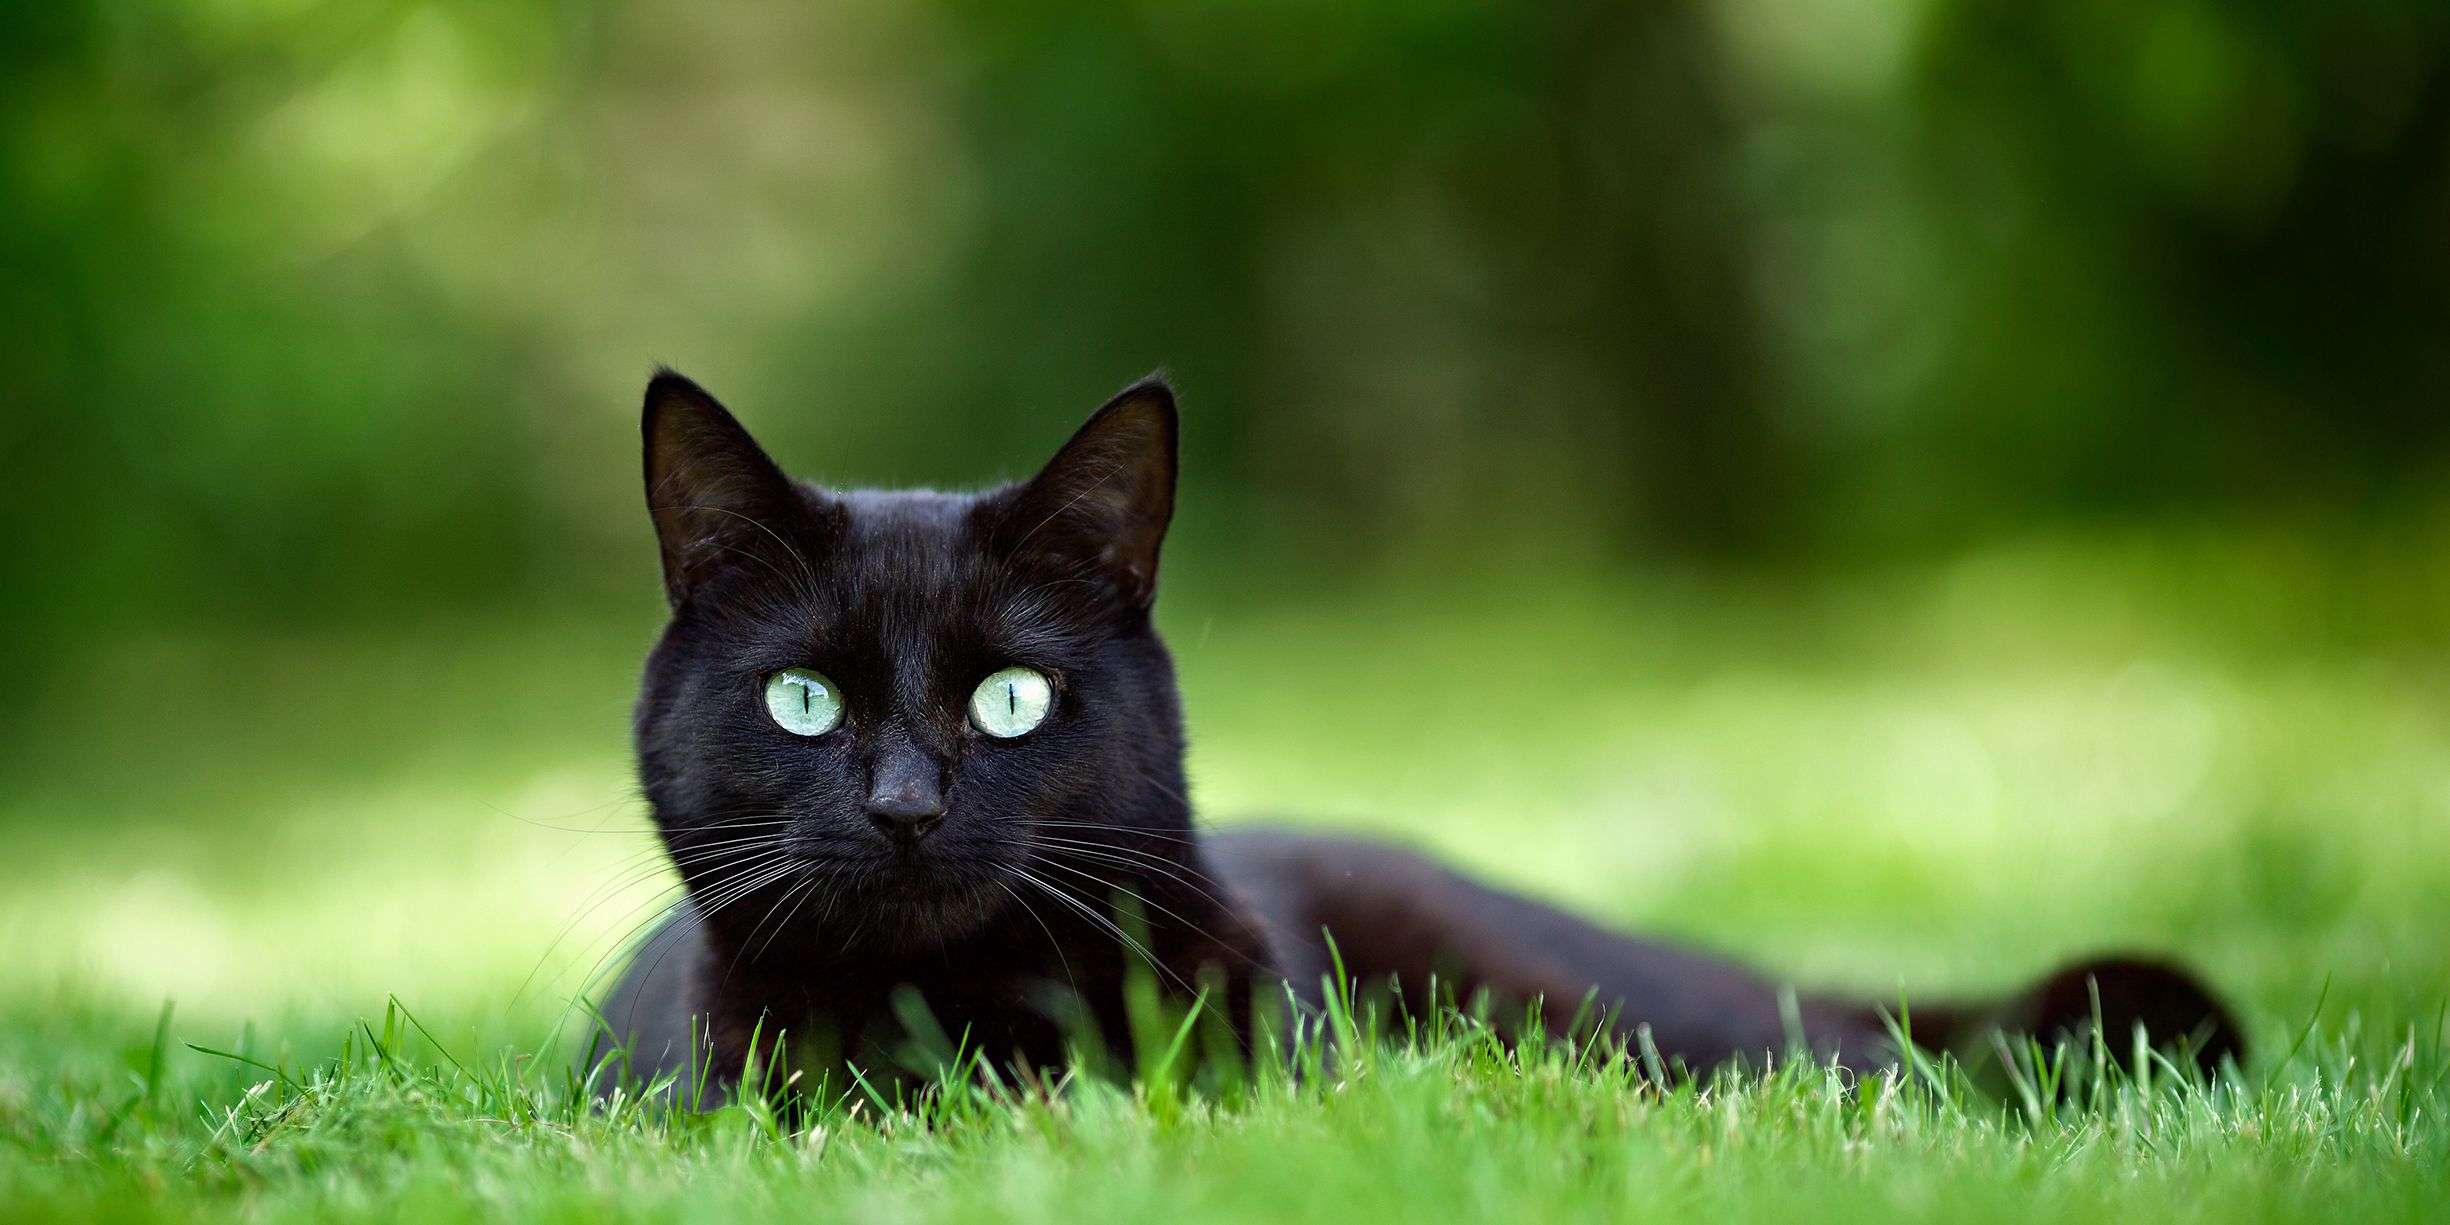 What does it mean when a black cat visits you?